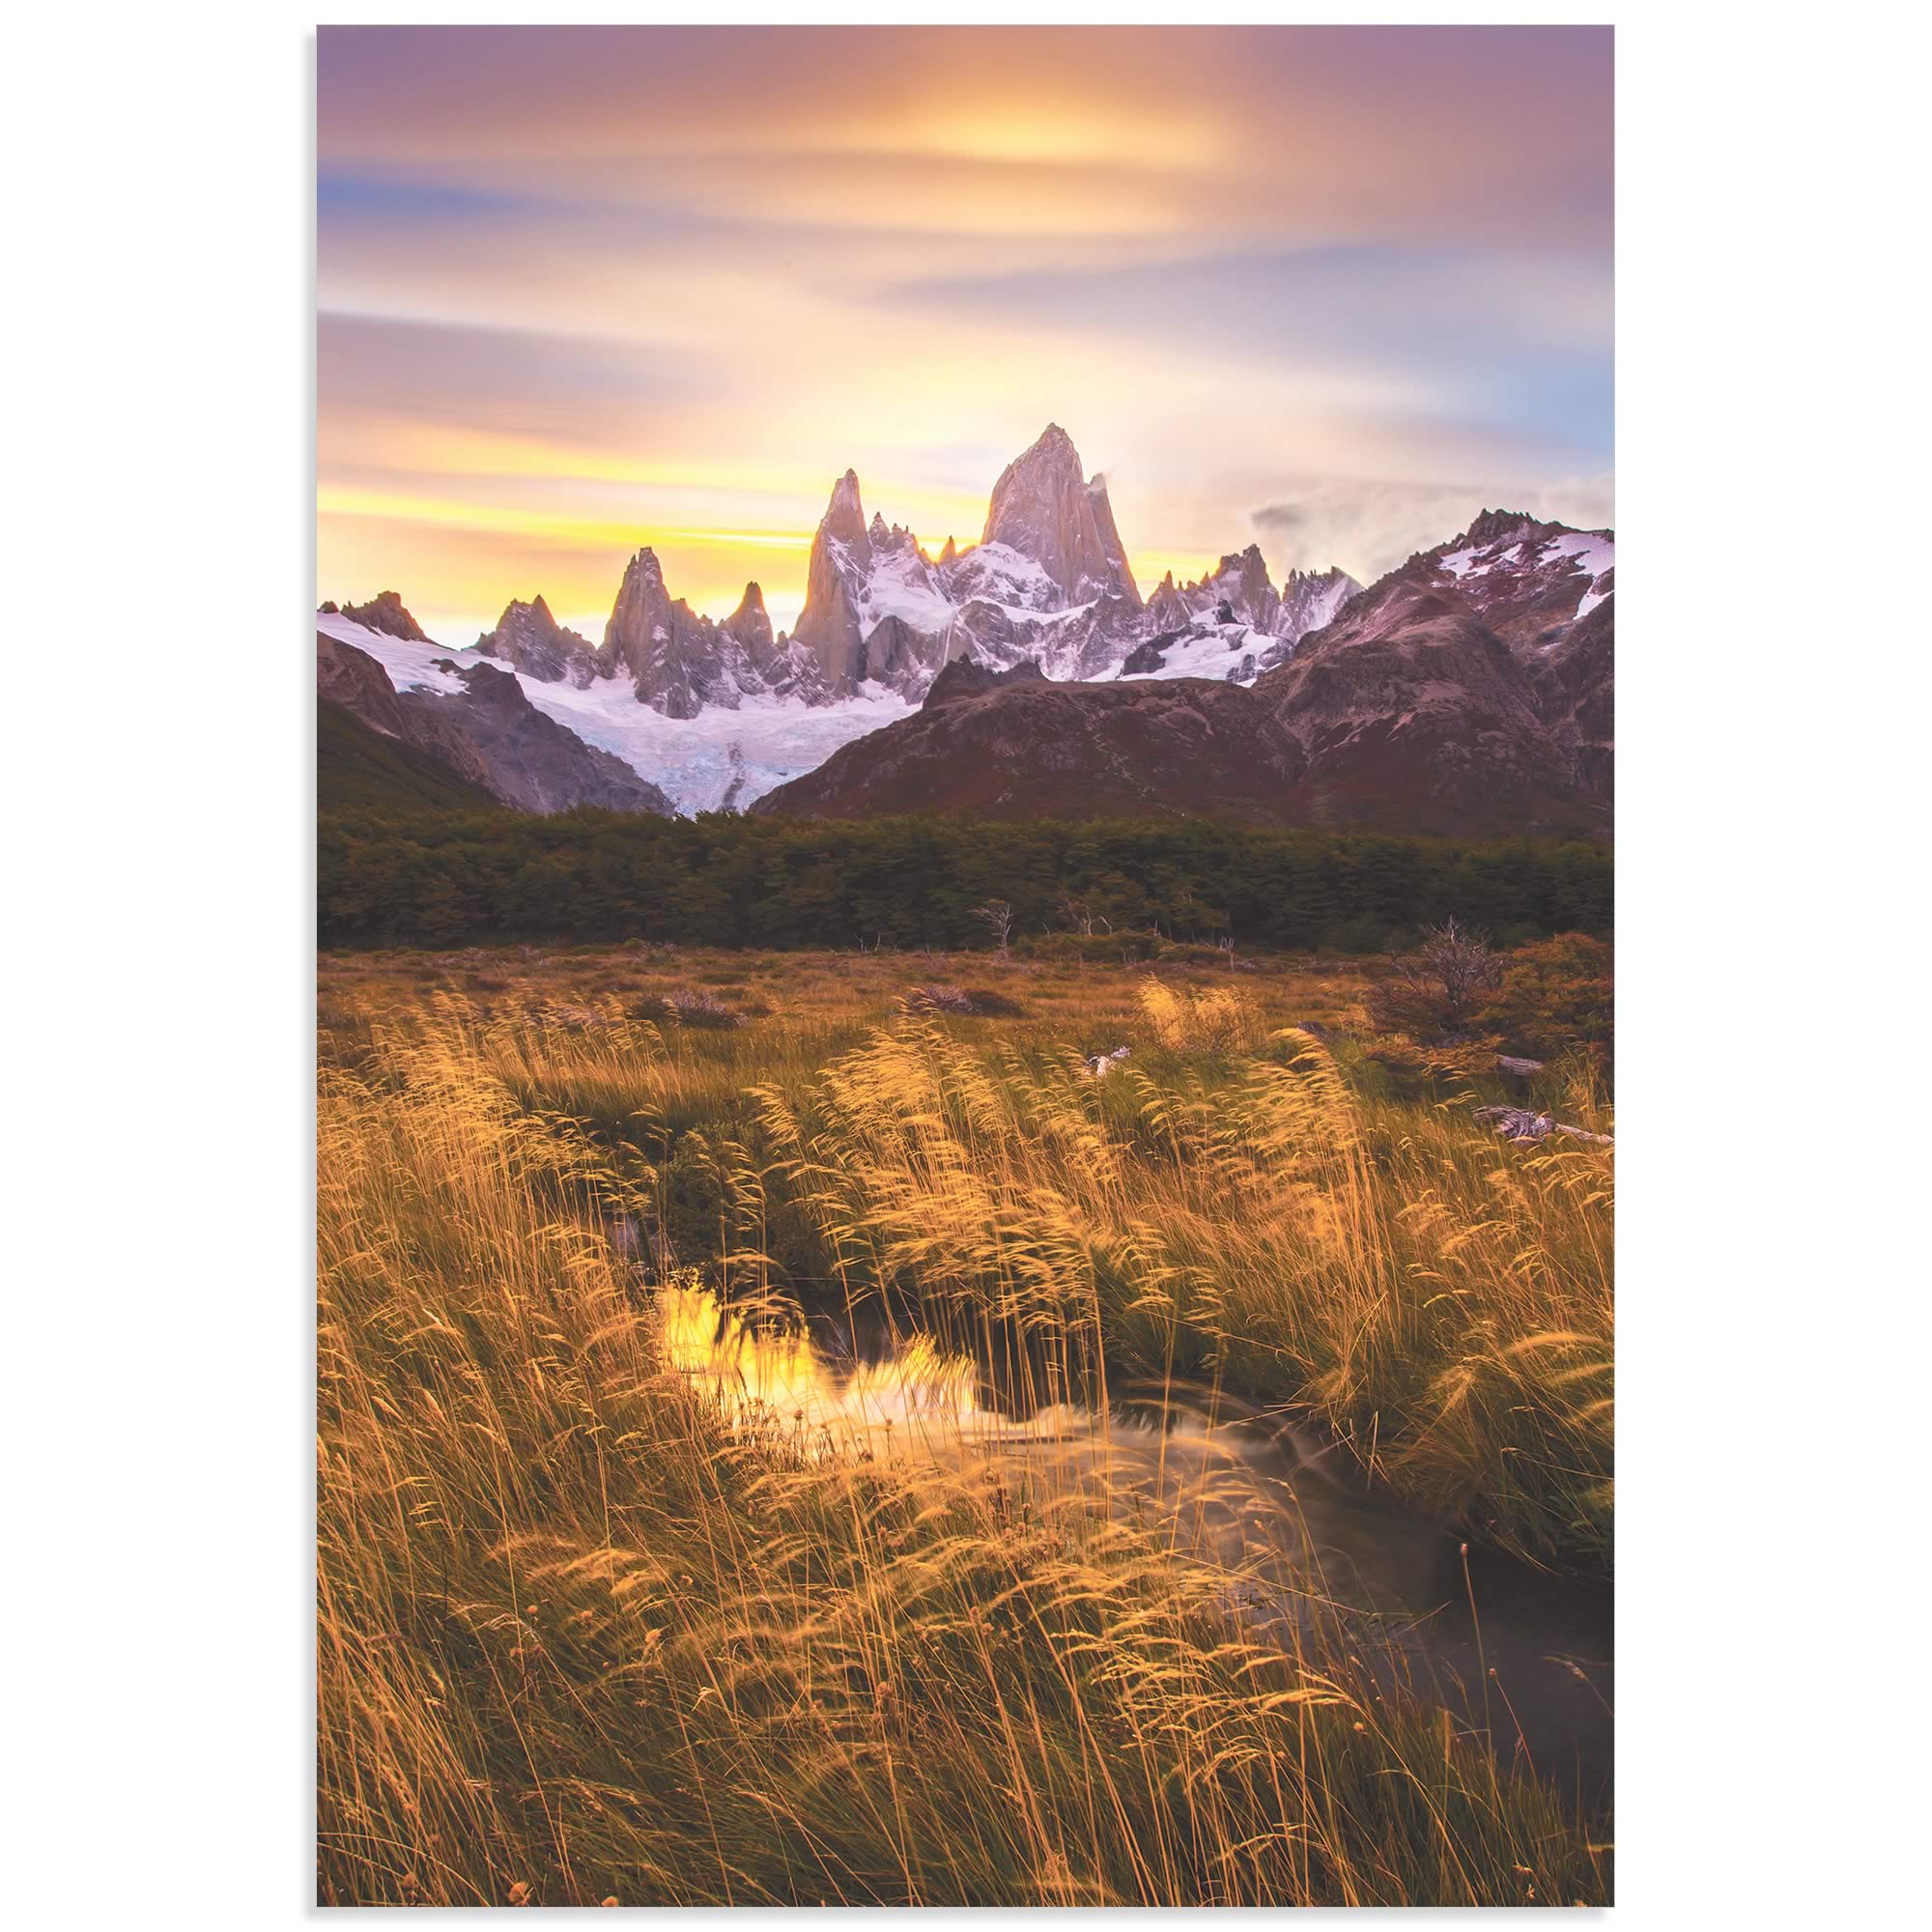 Fitz Roy at Golden Hour by Dianne Mao - Landscape Art on Metal or Acrylic